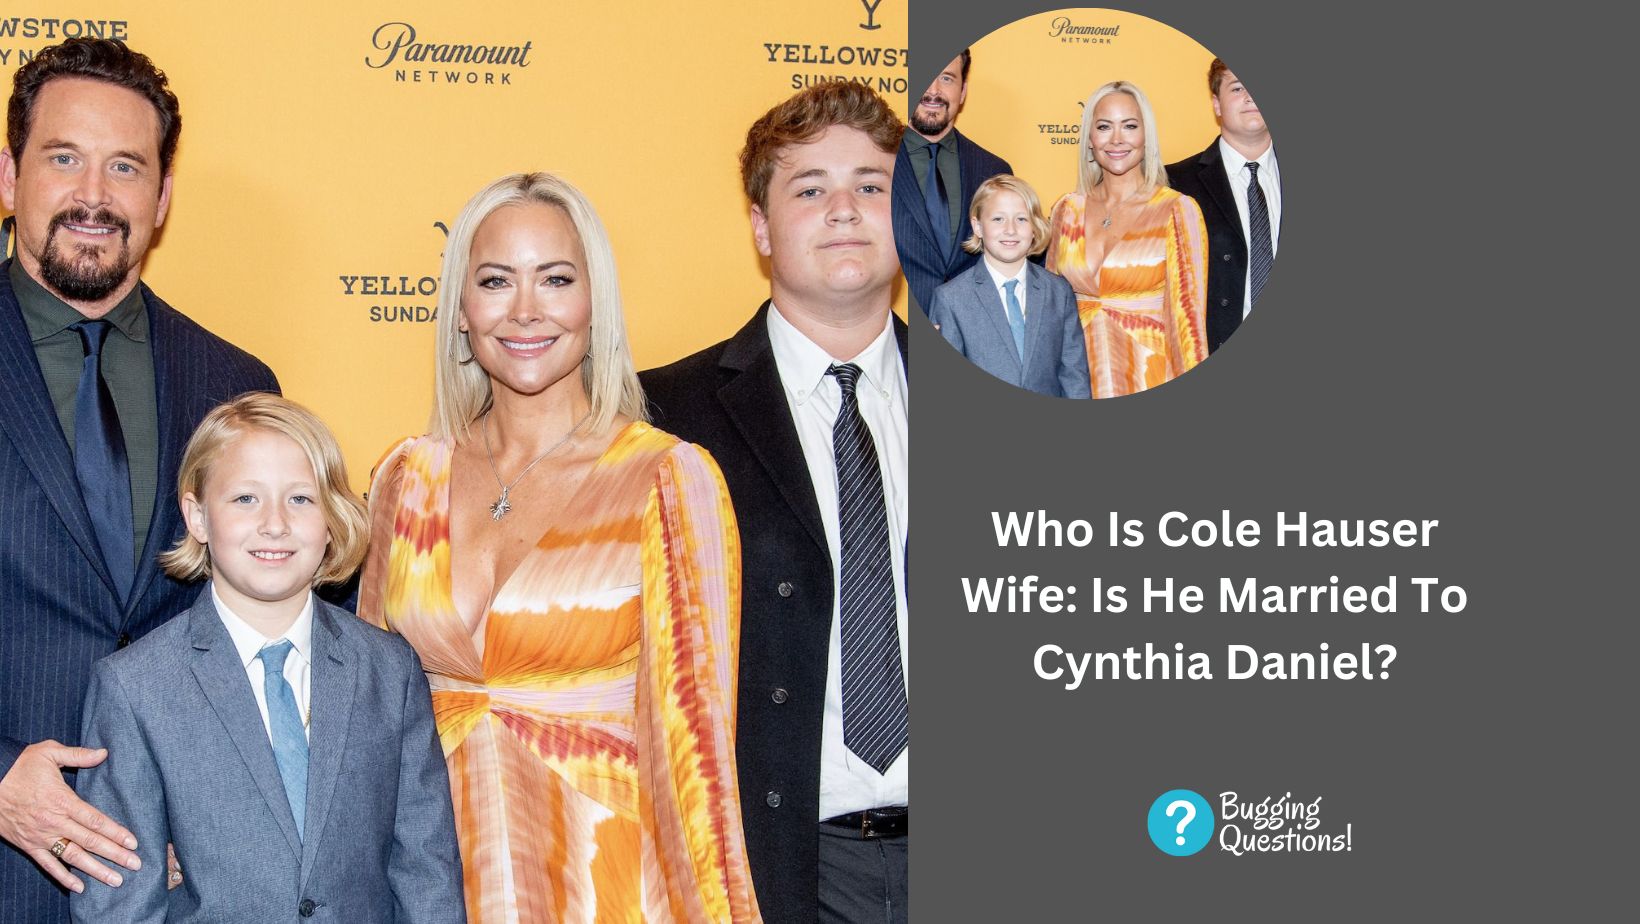 Who Is Cole Hauser Wife: Is He Married To Cynthia Daniel?